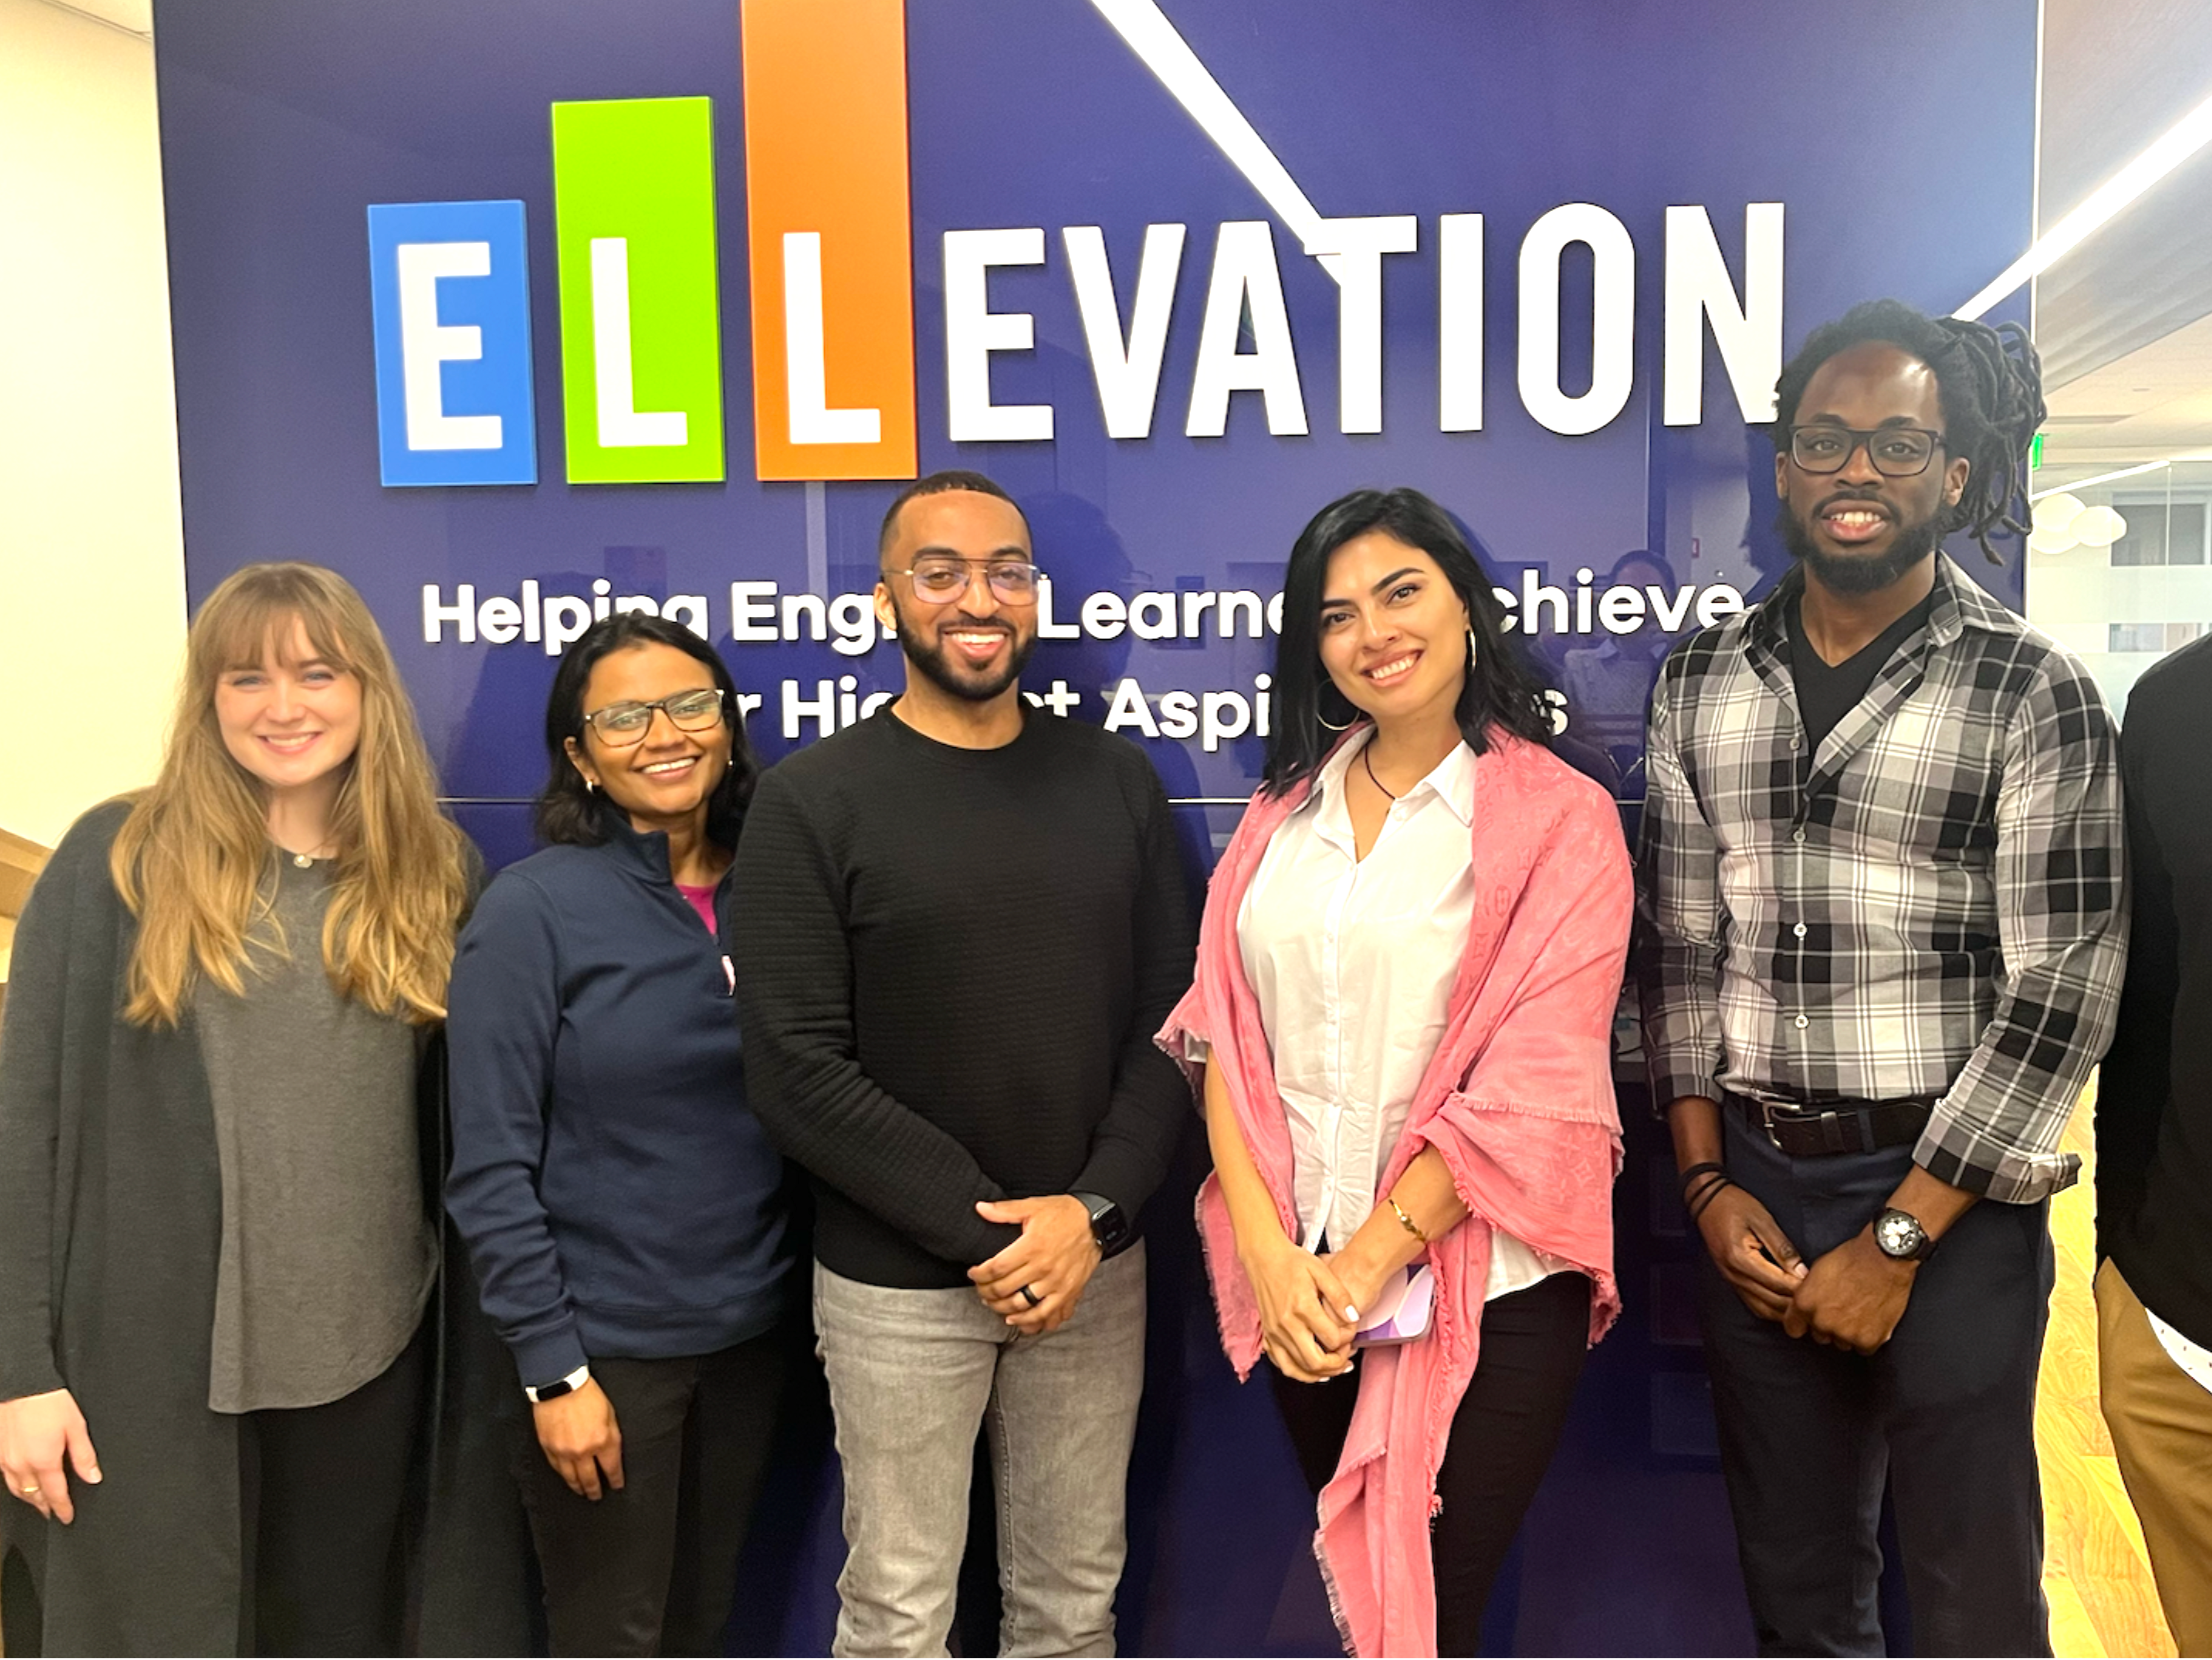 Ellevation Education team members posing for group photo in front of company logo